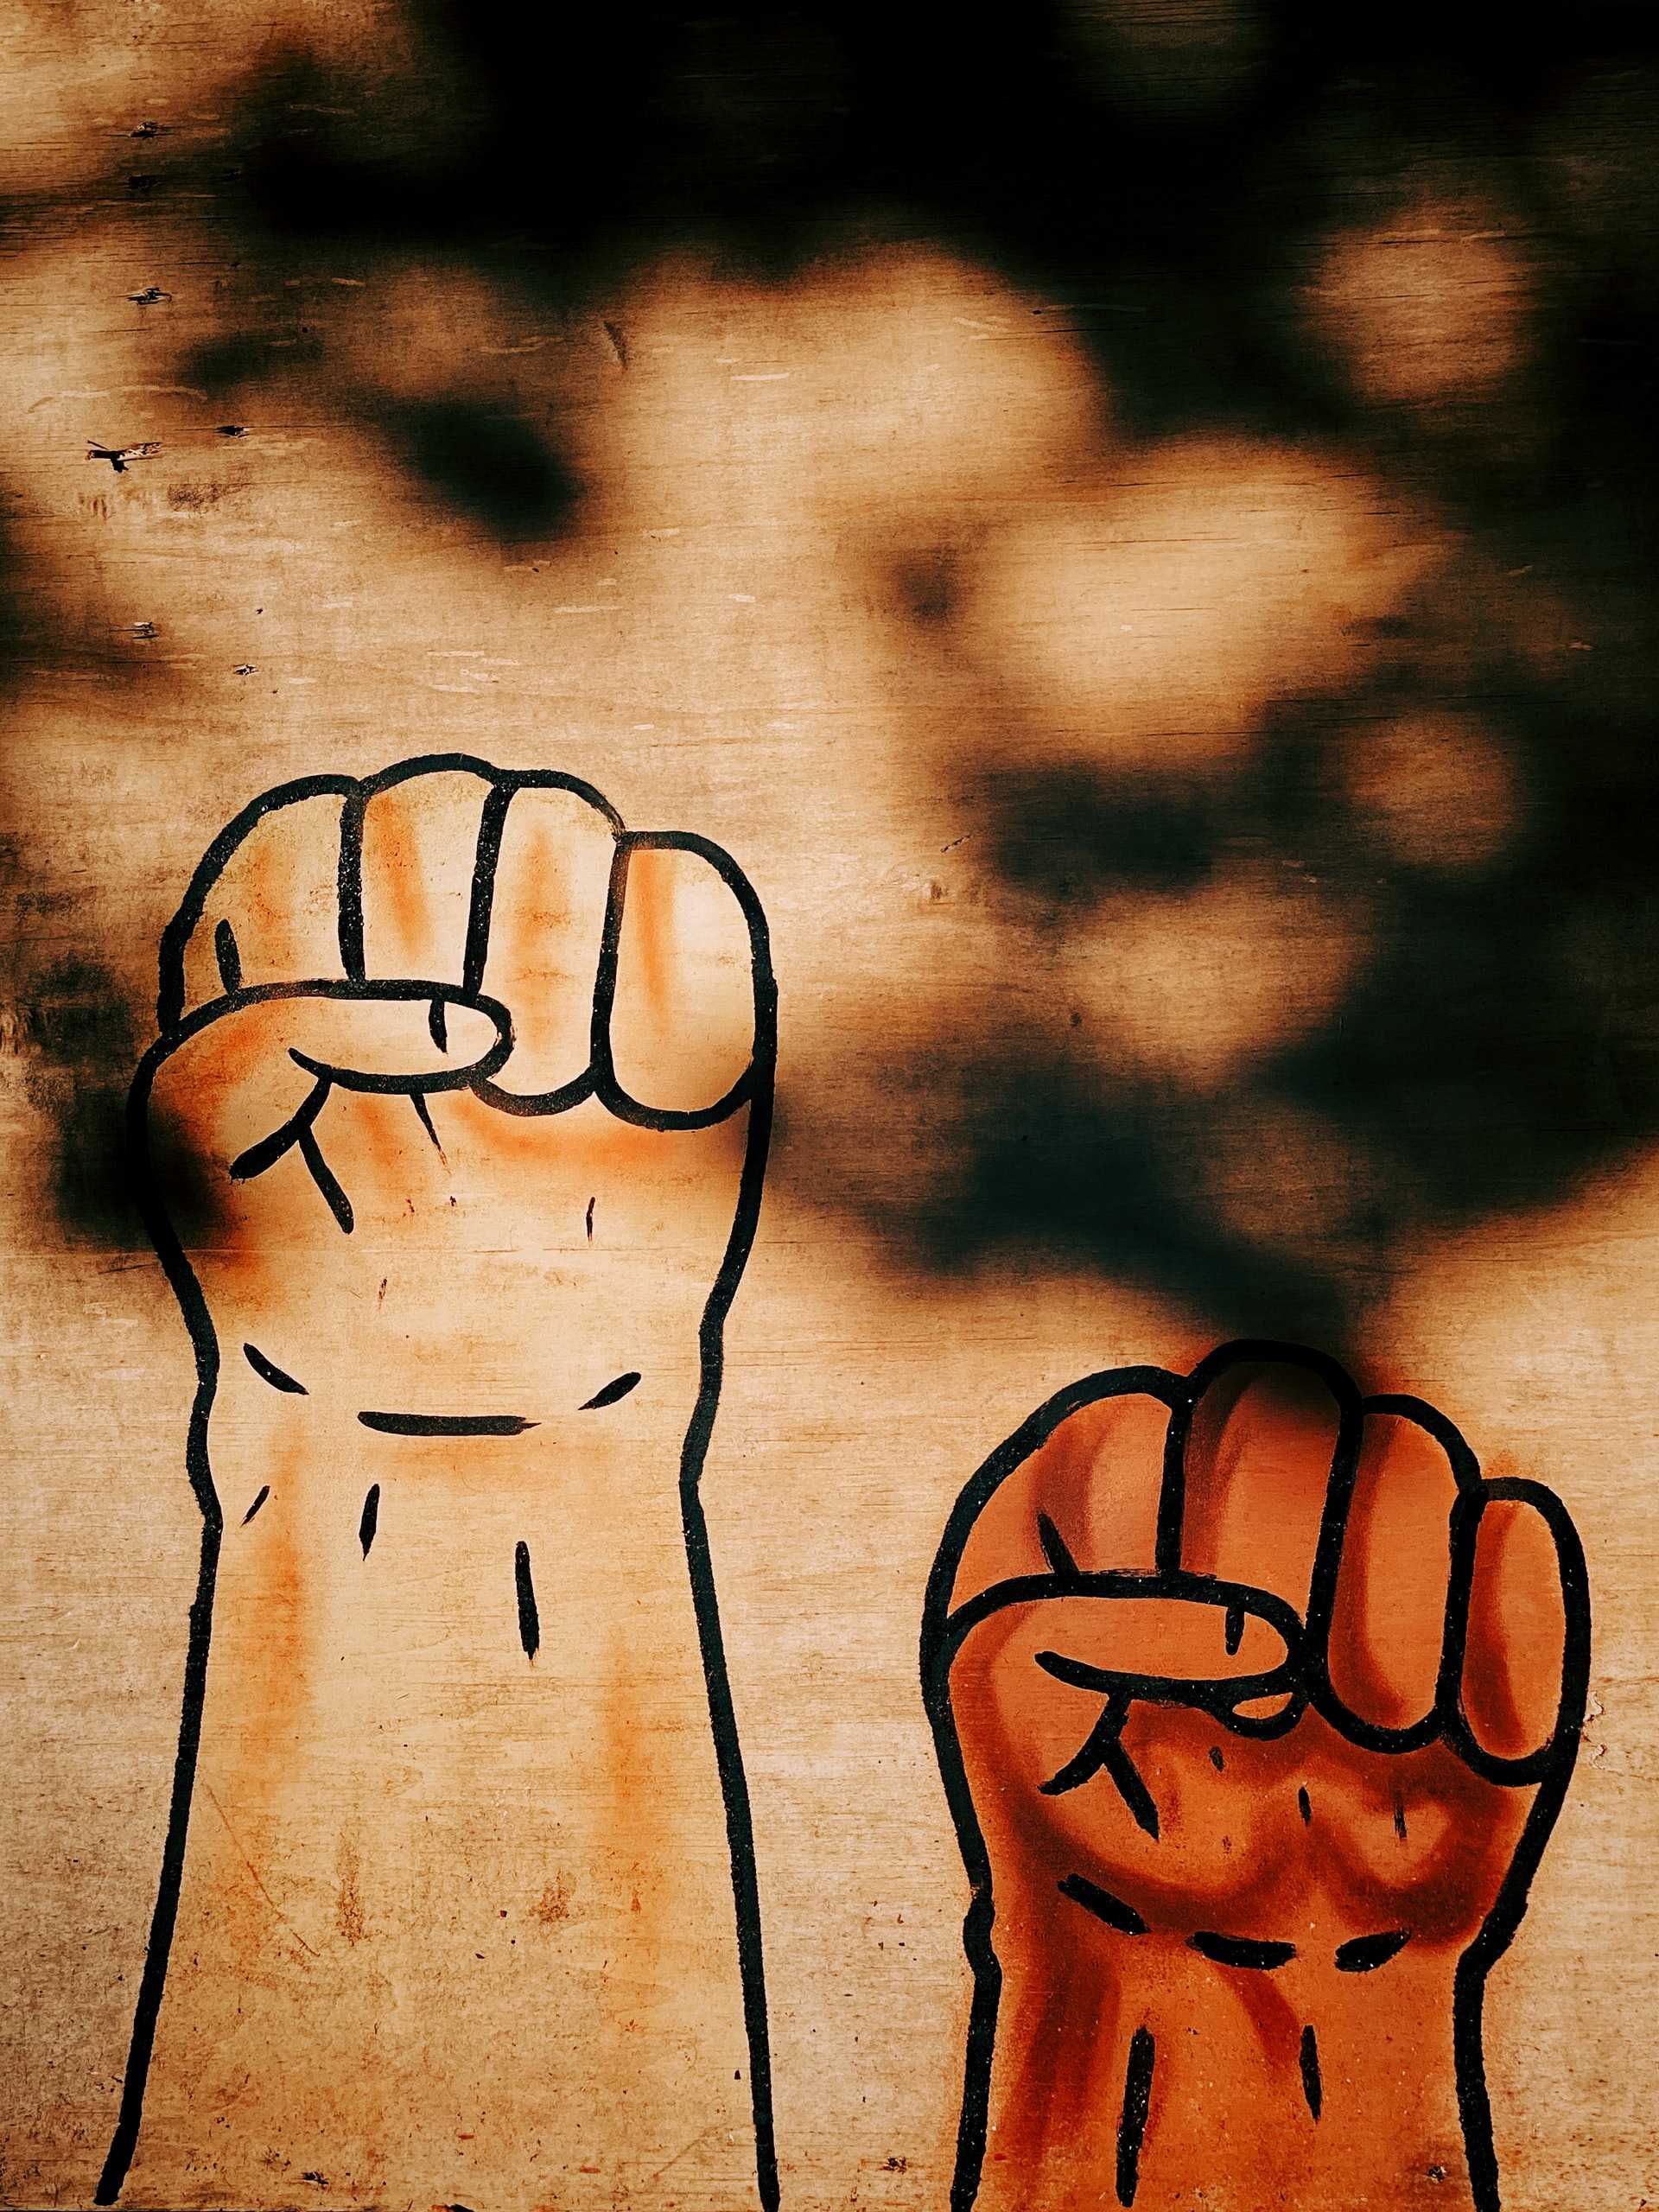 A drawing of raised fists.